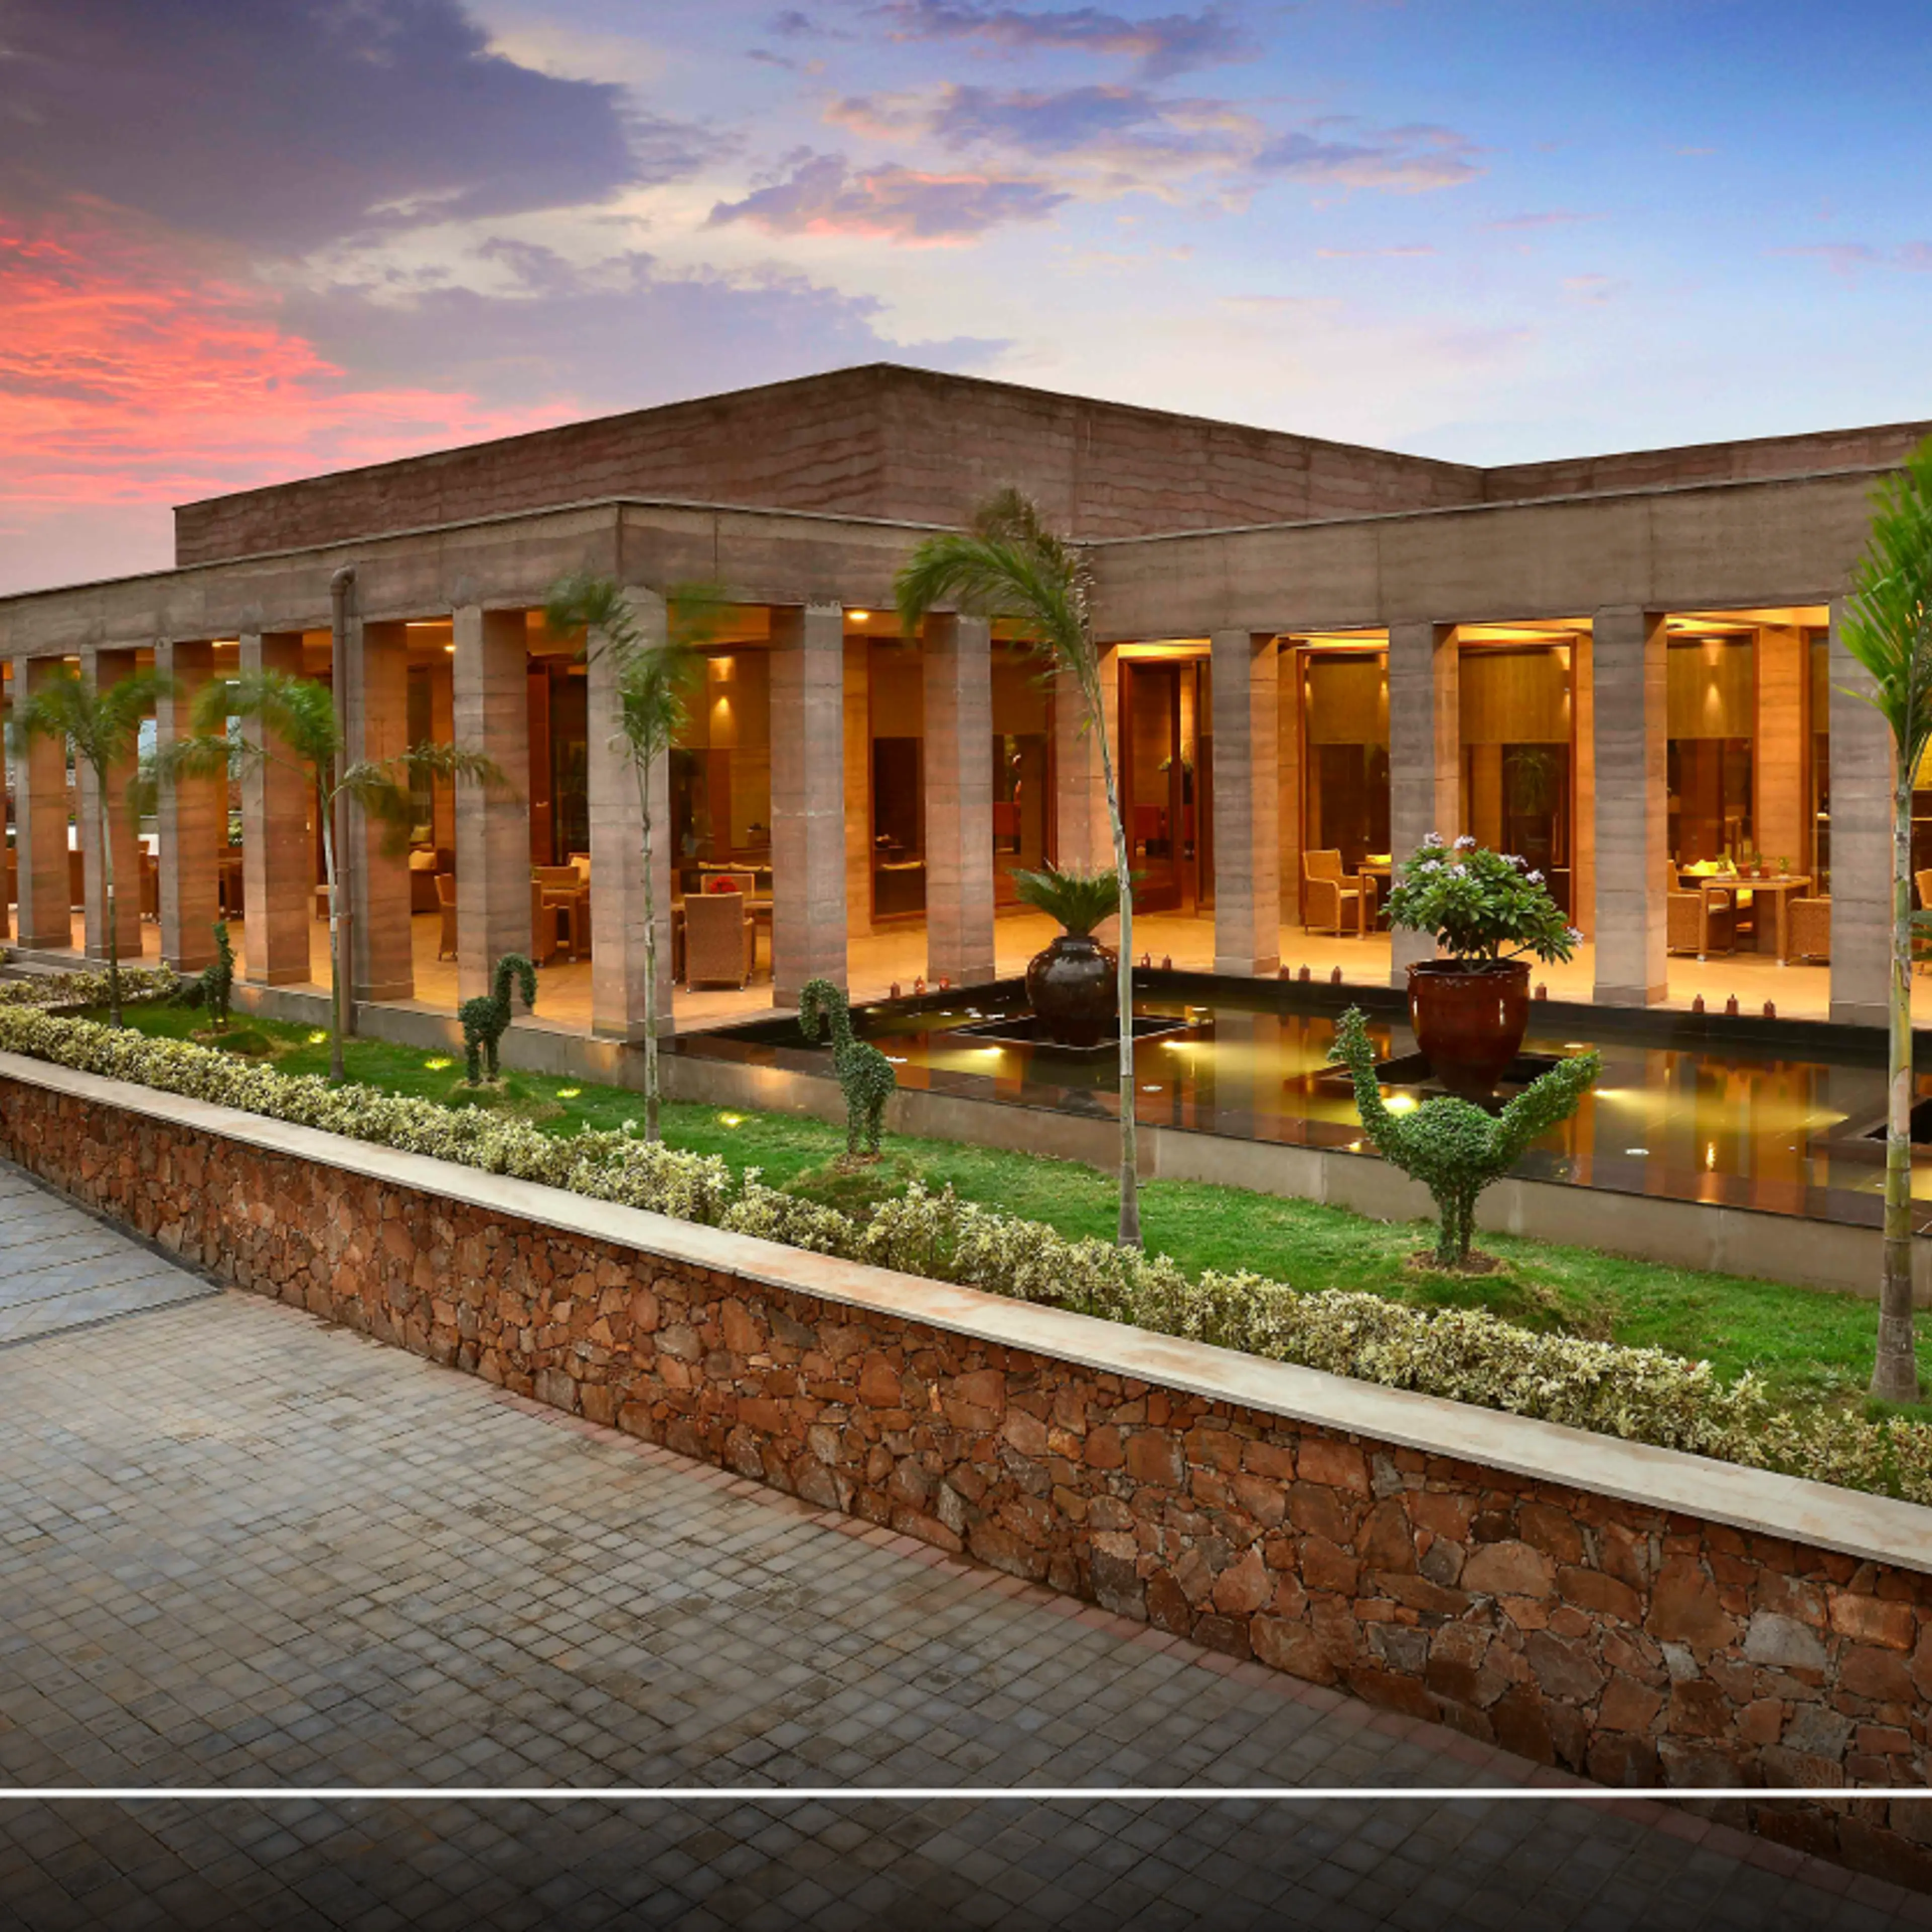 Away from the city’s chaos, LaLiT Mangar offers a rustic escape only an hour’s drive from Delhi 